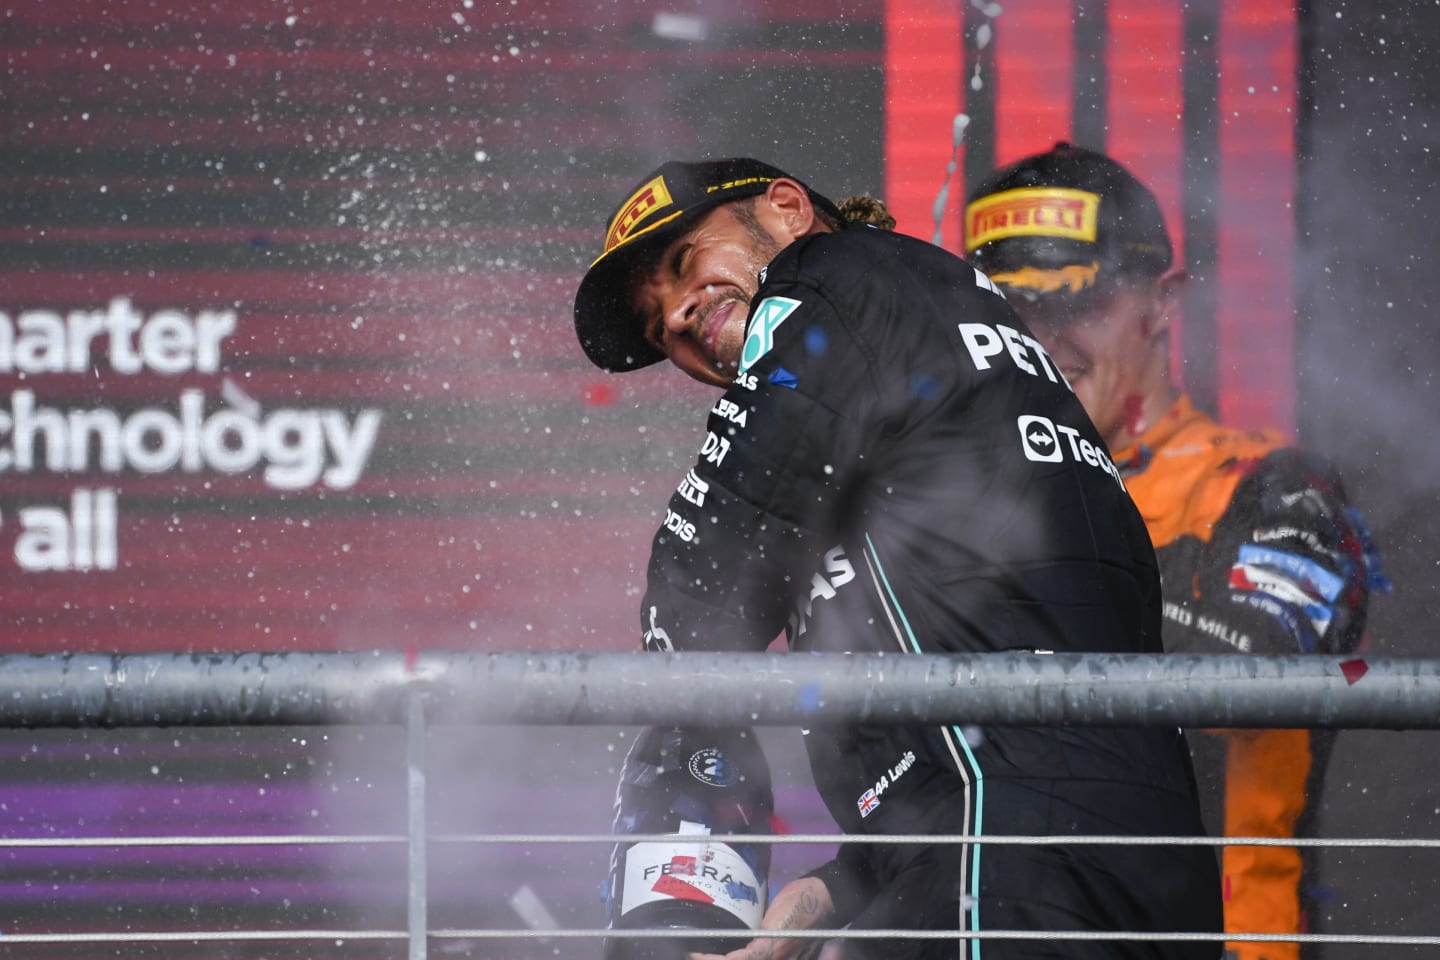 AUSTIN, TEXAS - OCTOBER 22: Second placed Lewis Hamilton of Great Britain and Mercedes celebrates on the podium during the F1 Grand Prix of United States at Circuit of The Americas on October 22, 2023 in Austin, Texas. (Photo by Rudy Carezzevoli/Getty Images)